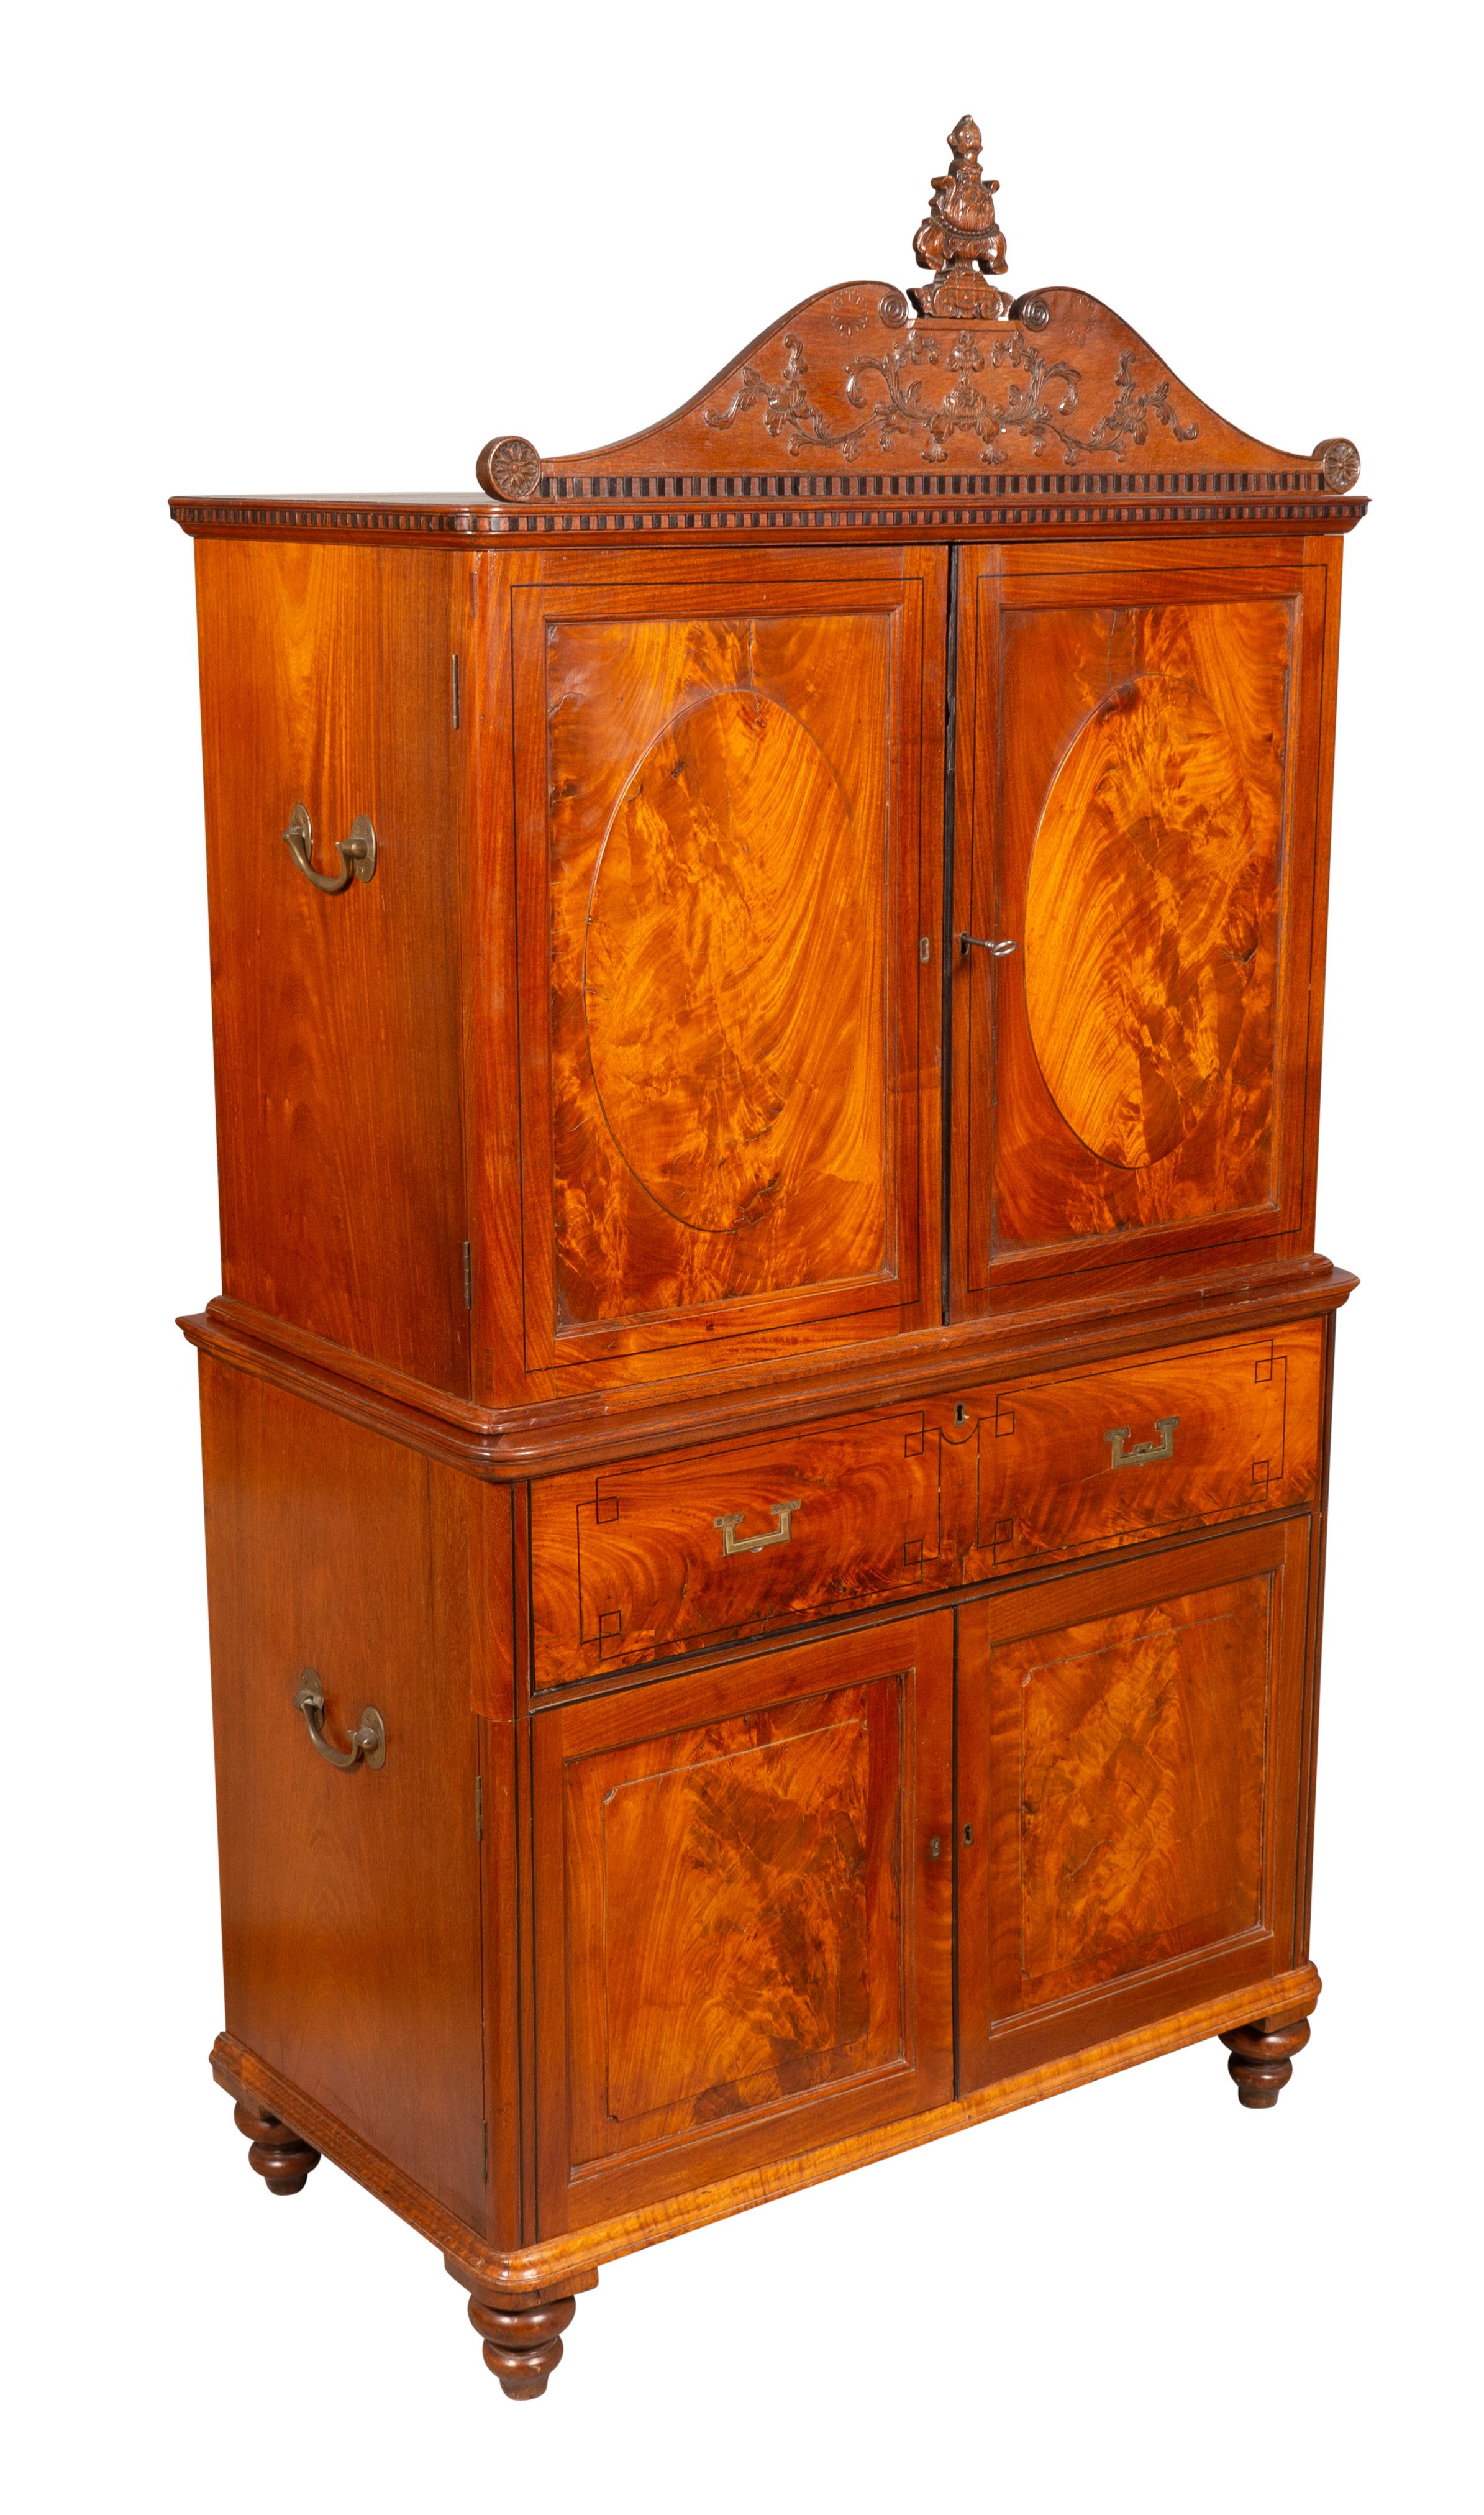 An unusual cabinet commissioned in China by a British officer. In two parts for transporting. Of diminutive scale with a removable carved cornice seated on a cabinet with two paneled doors opening to slide out linen drawers. The base with a top